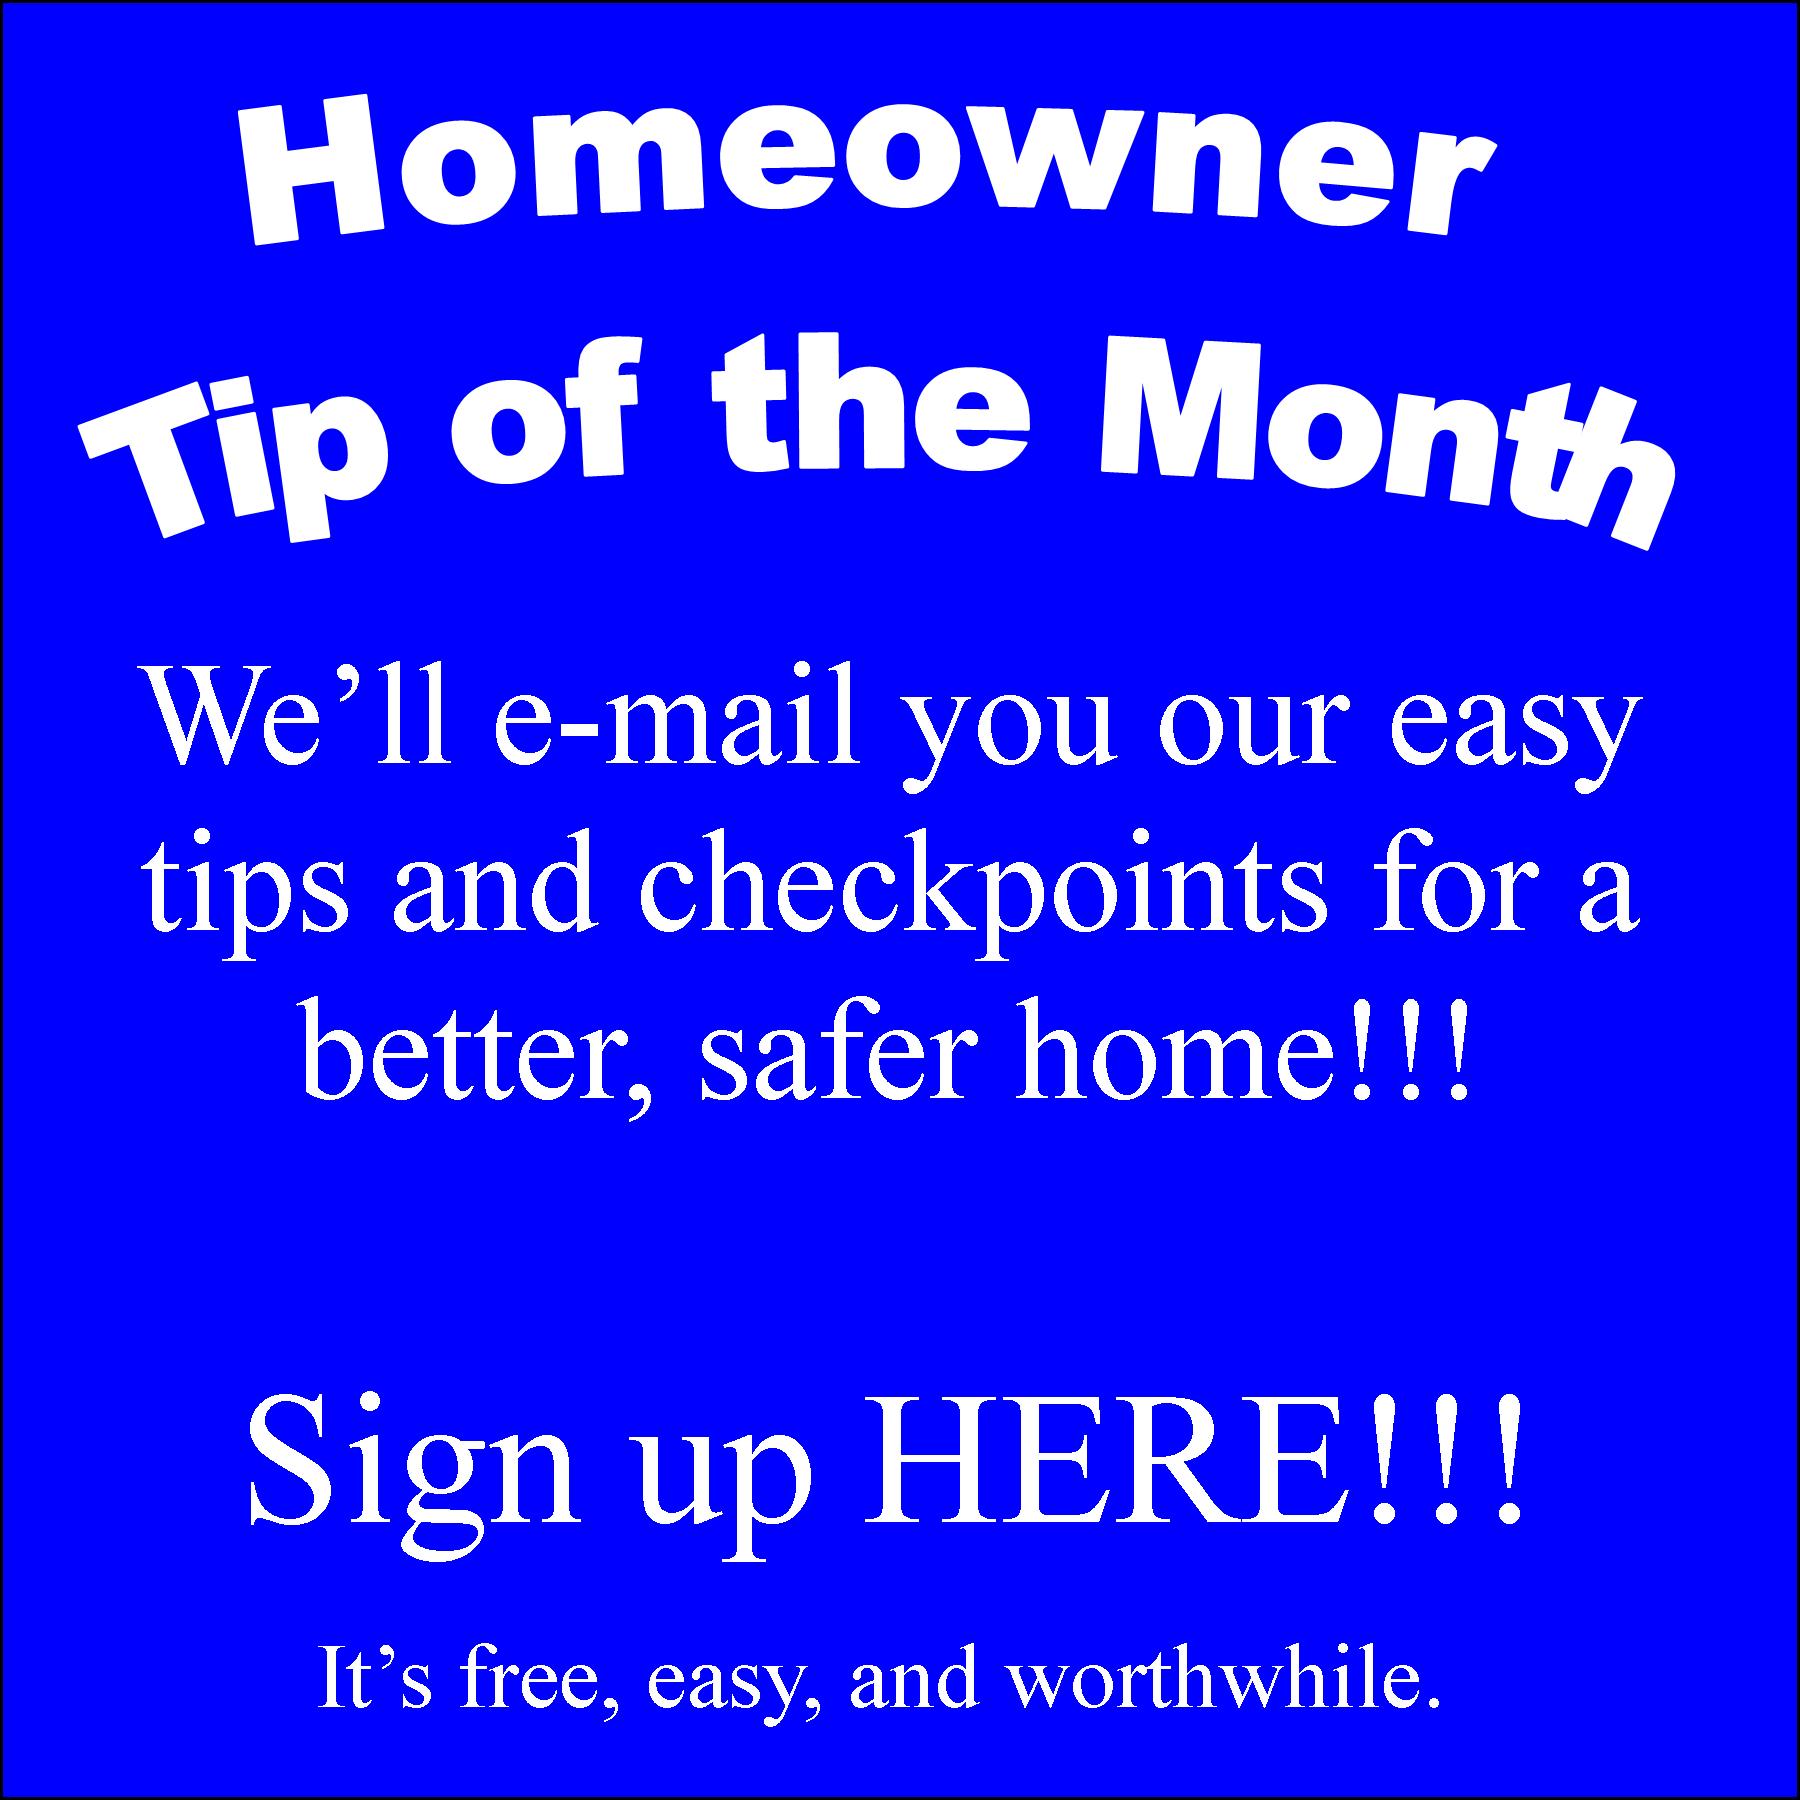 Tip of the Month